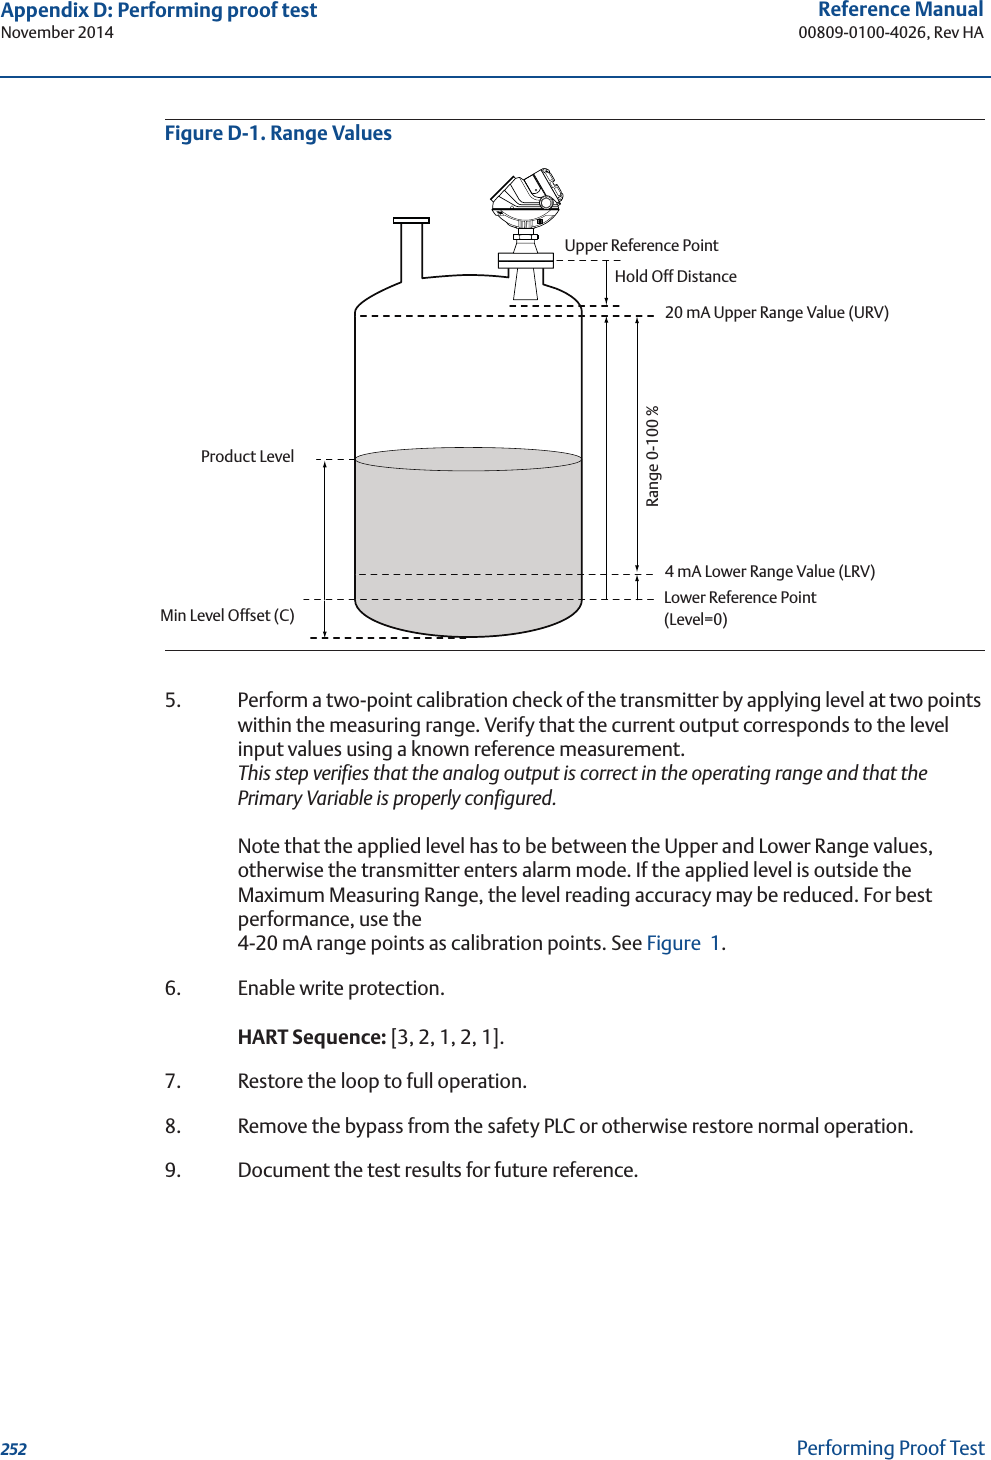 252Reference Manual00809-0100-4026, Rev HAAppendix D: Performing proof testNovember 2014Performing Proof TestFigure D-1. Range Values5. Perform a two-point calibration check of the transmitter by applying level at two points within the measuring range. Verify that the current output corresponds to the level input values using a known reference measurement.This step verifies that the analog output is correct in the operating range and that the Primary Variable is properly configured.Note that the applied level has to be between the Upper and Lower Range values, otherwise the transmitter enters alarm mode. If the applied level is outside the Maximum Measuring Range, the level reading accuracy may be reduced. For best performance, use the 4-20 mA range points as calibration points. See Figure 1.6. Enable write protection.HART Sequence: [3, 2, 1, 2, 1].7. Restore the loop to full operation.8. Remove the bypass from the safety PLC or otherwise restore normal operation.9. Document the test results for future reference.20 mA Upper Range Value (URV)Product Level4 mA Lower Range Value (LRV)Range 0-100 %Upper Reference PointMin Level Offset (C)Hold Off DistanceLower Reference Point(Level=0)